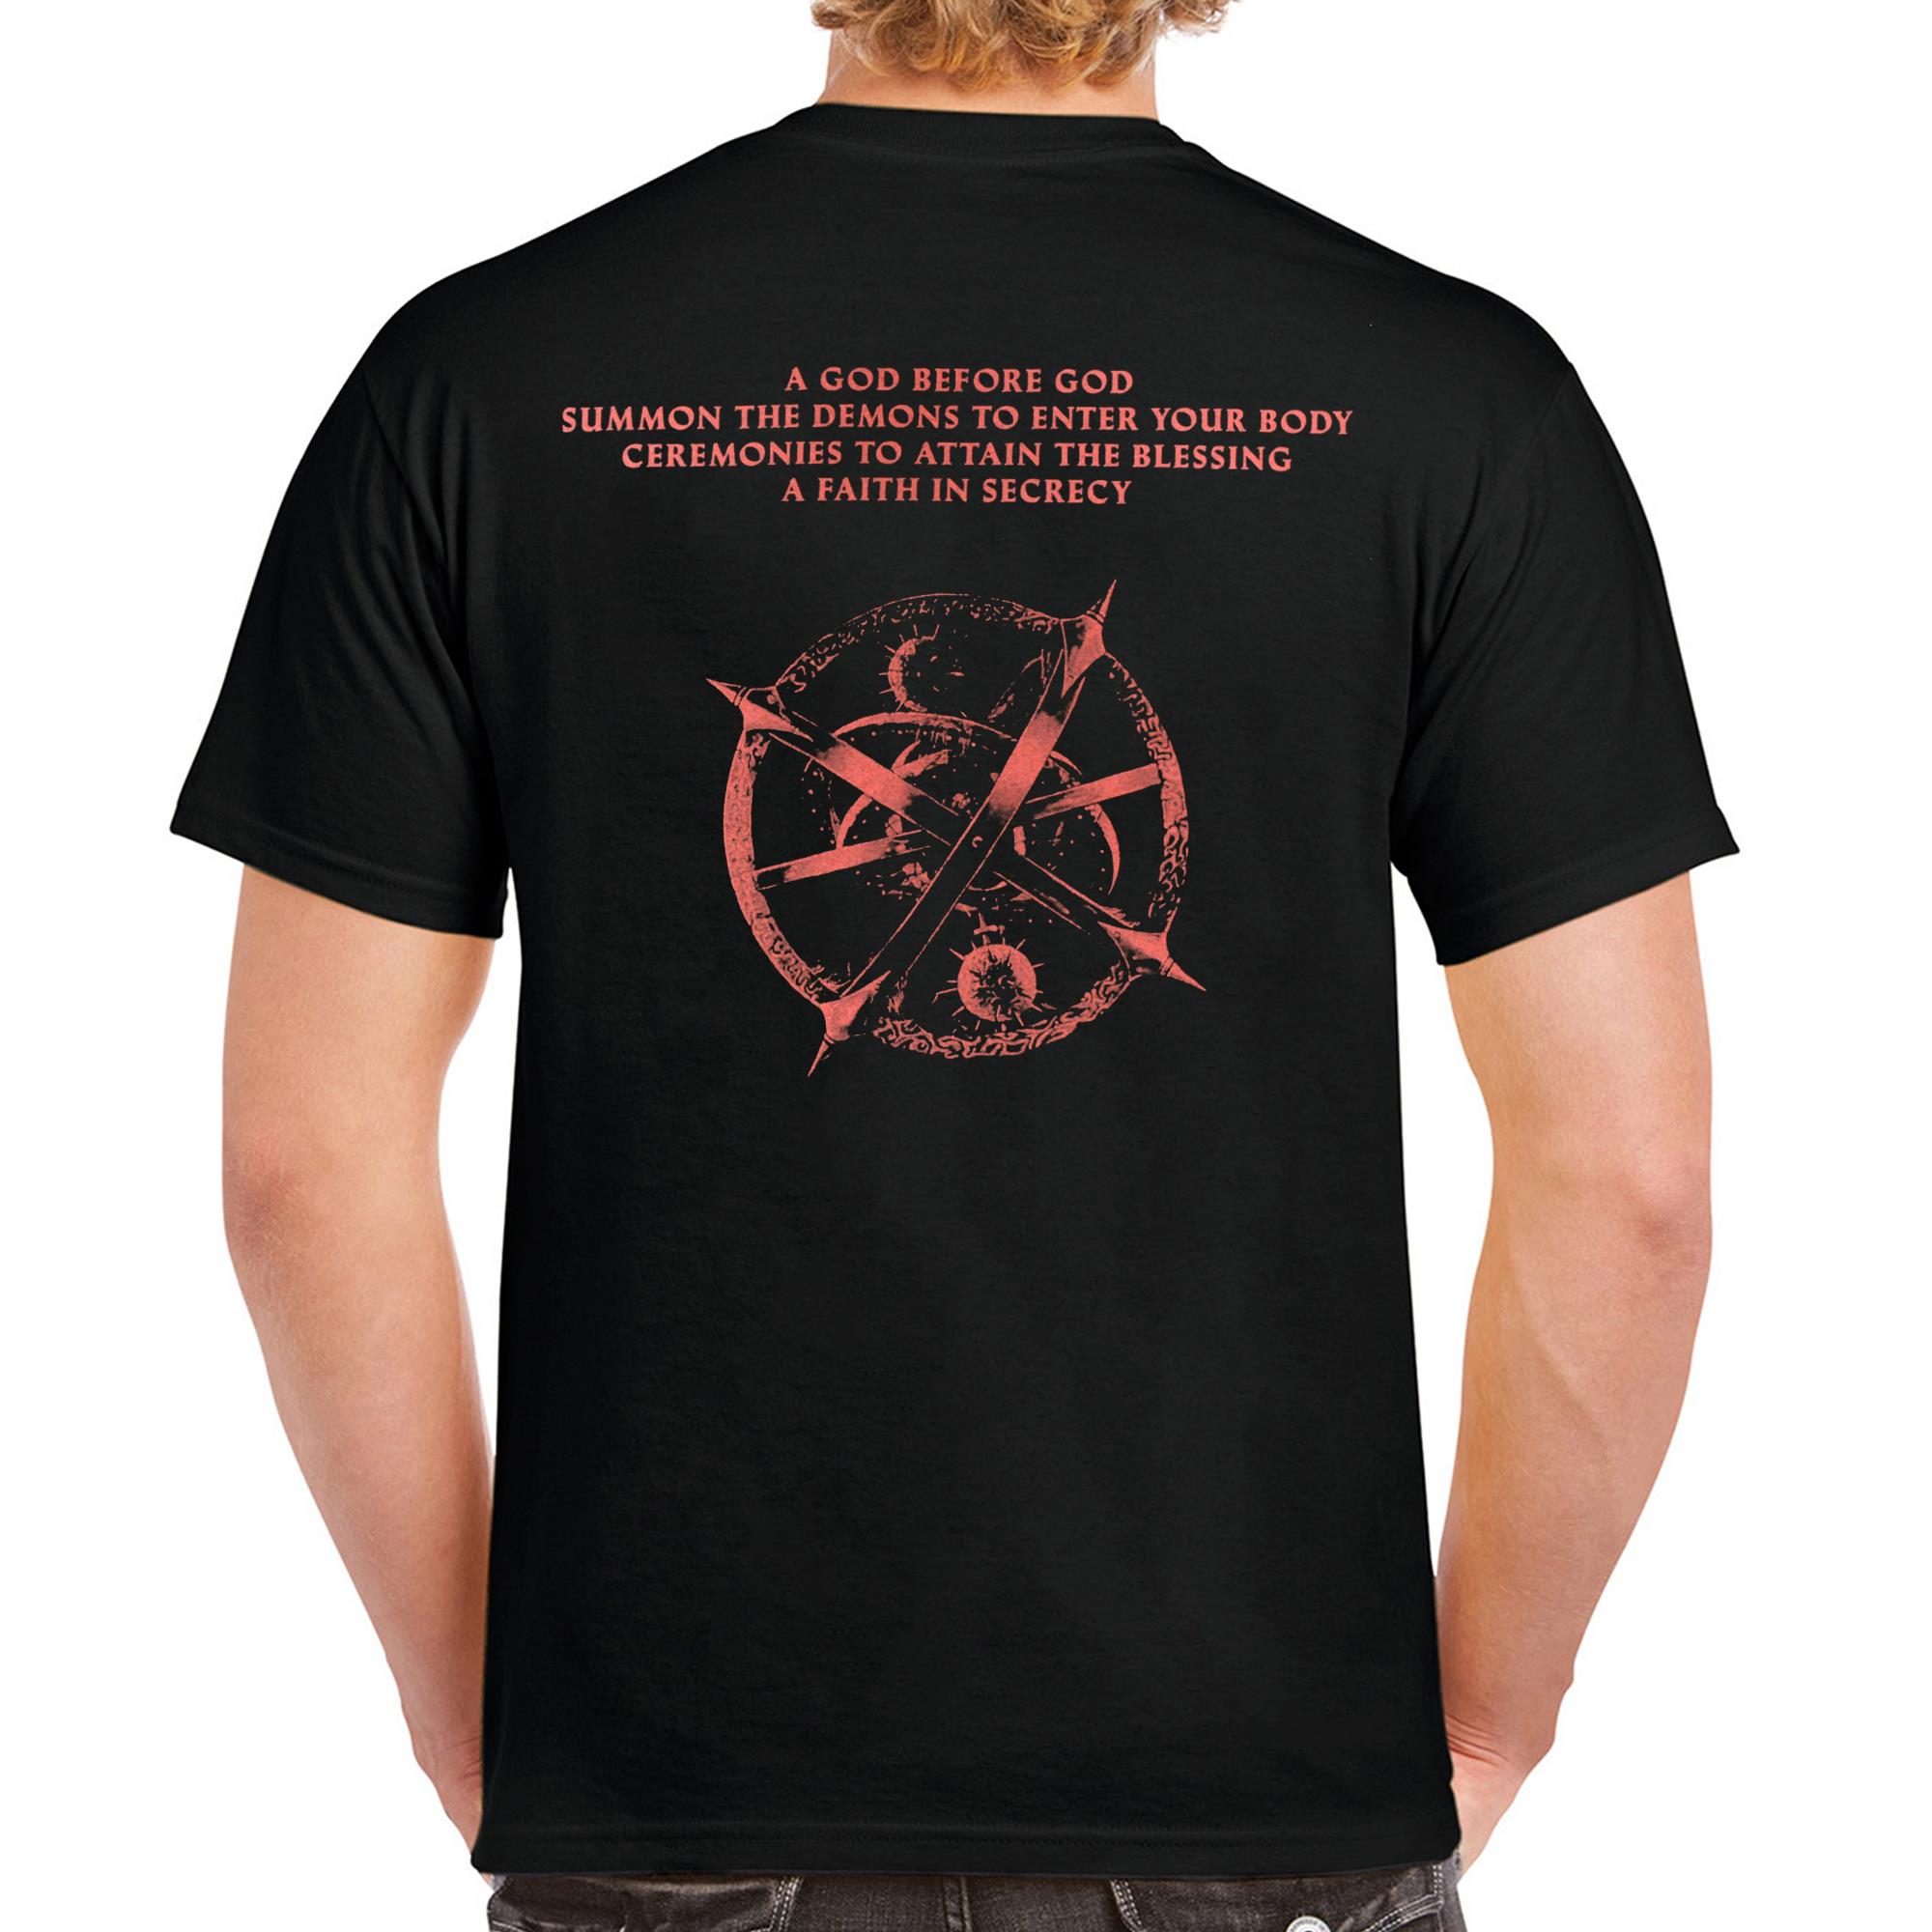 Testimony of the Ancients T-shirt